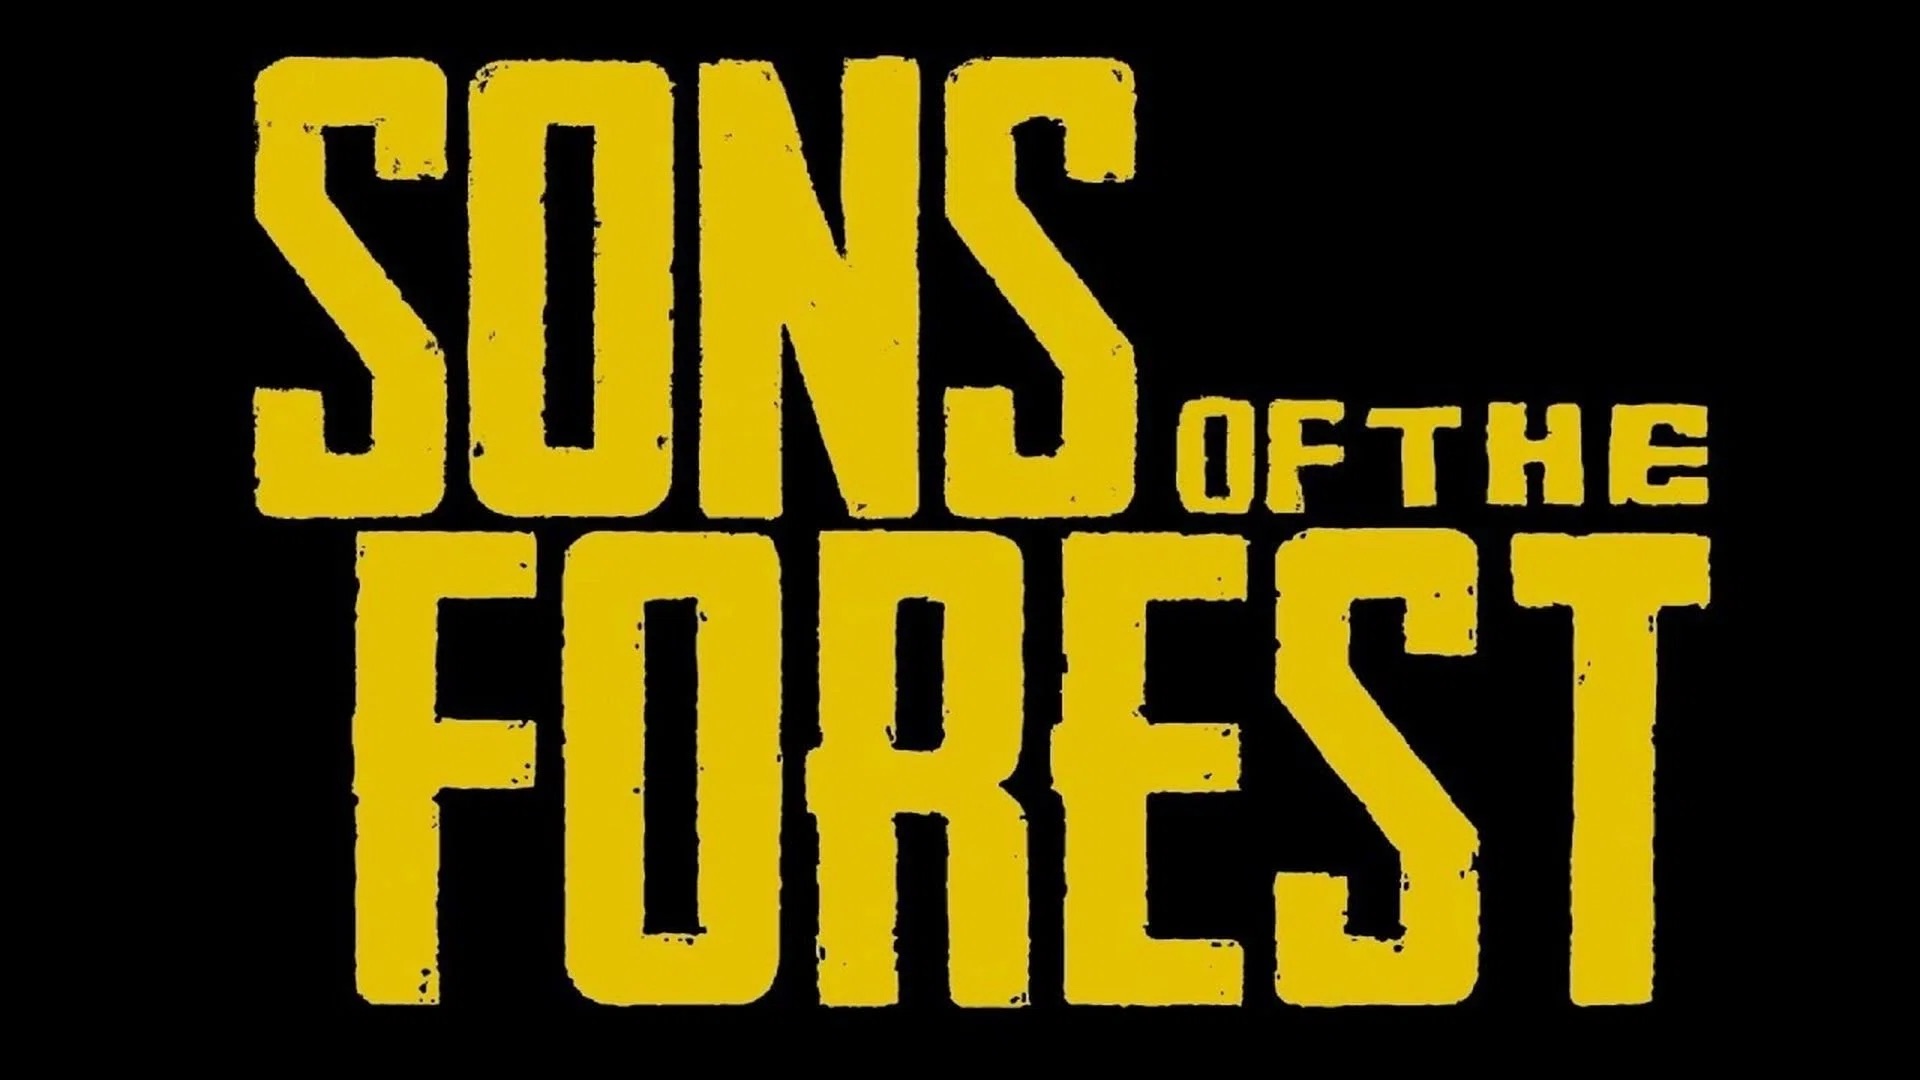 Sons of the Forest delayed until October